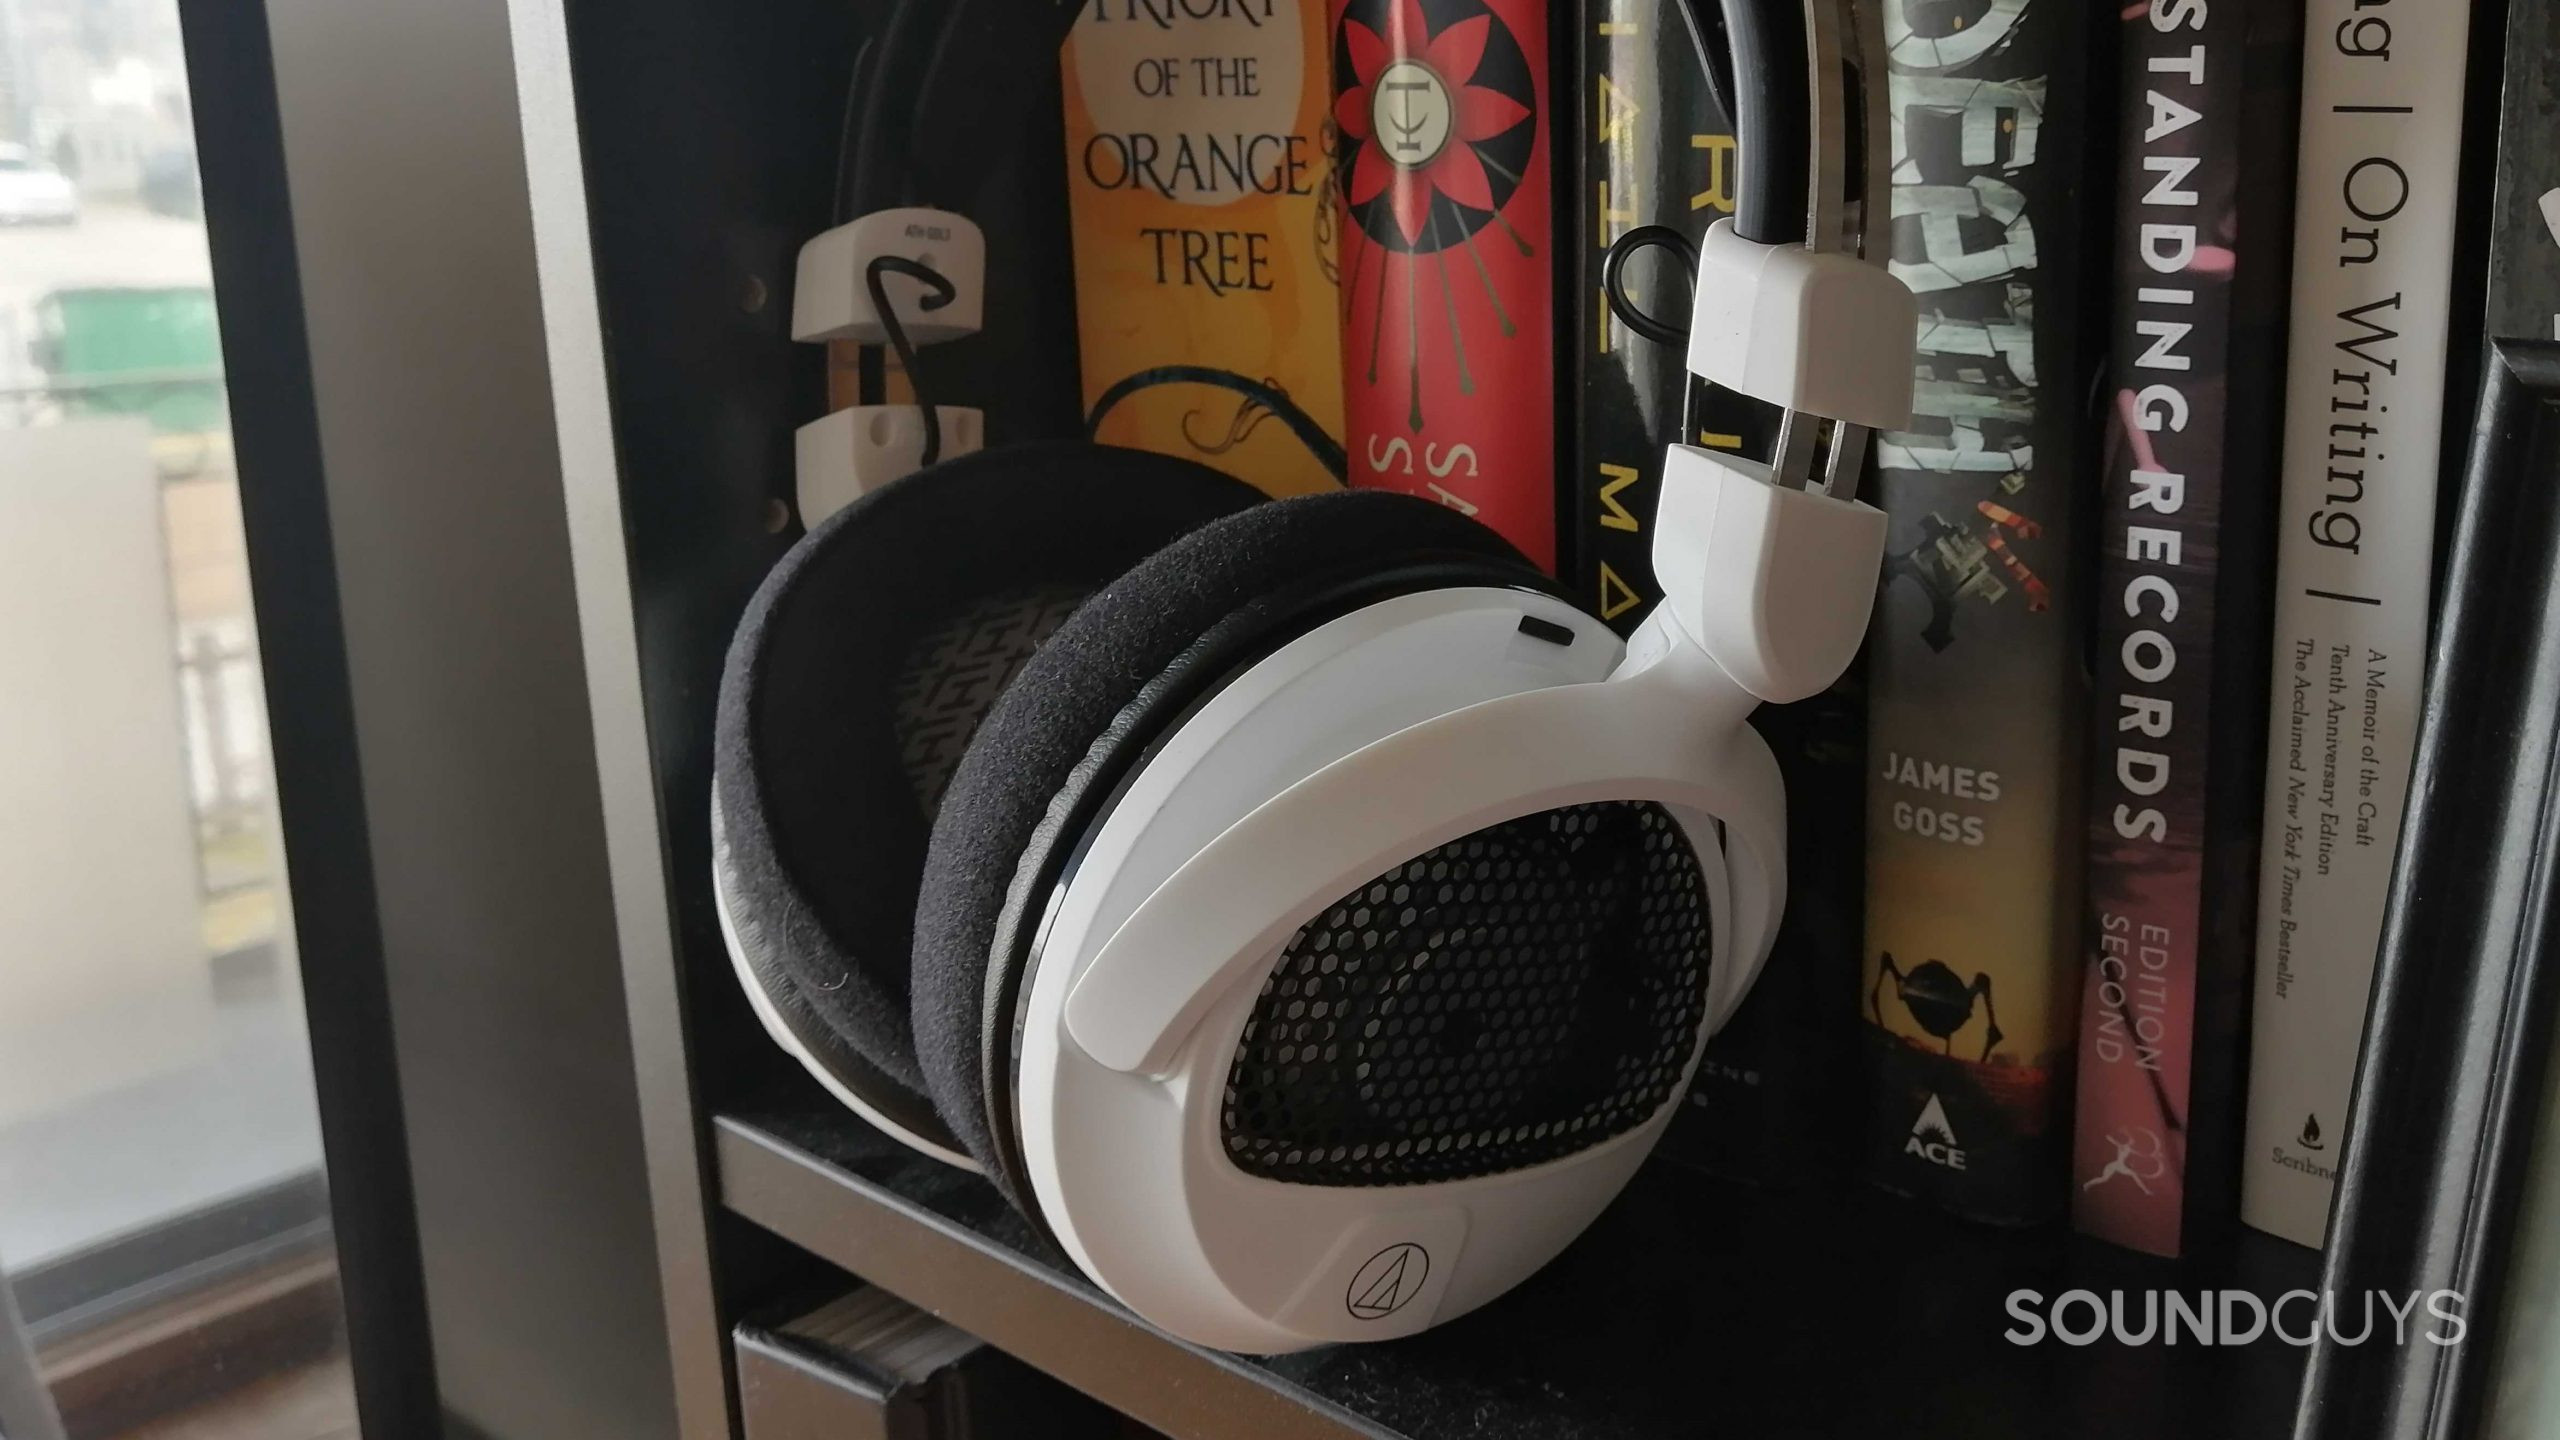 The Audio-Technica ATH-GDL3 sitting on a bookshelf